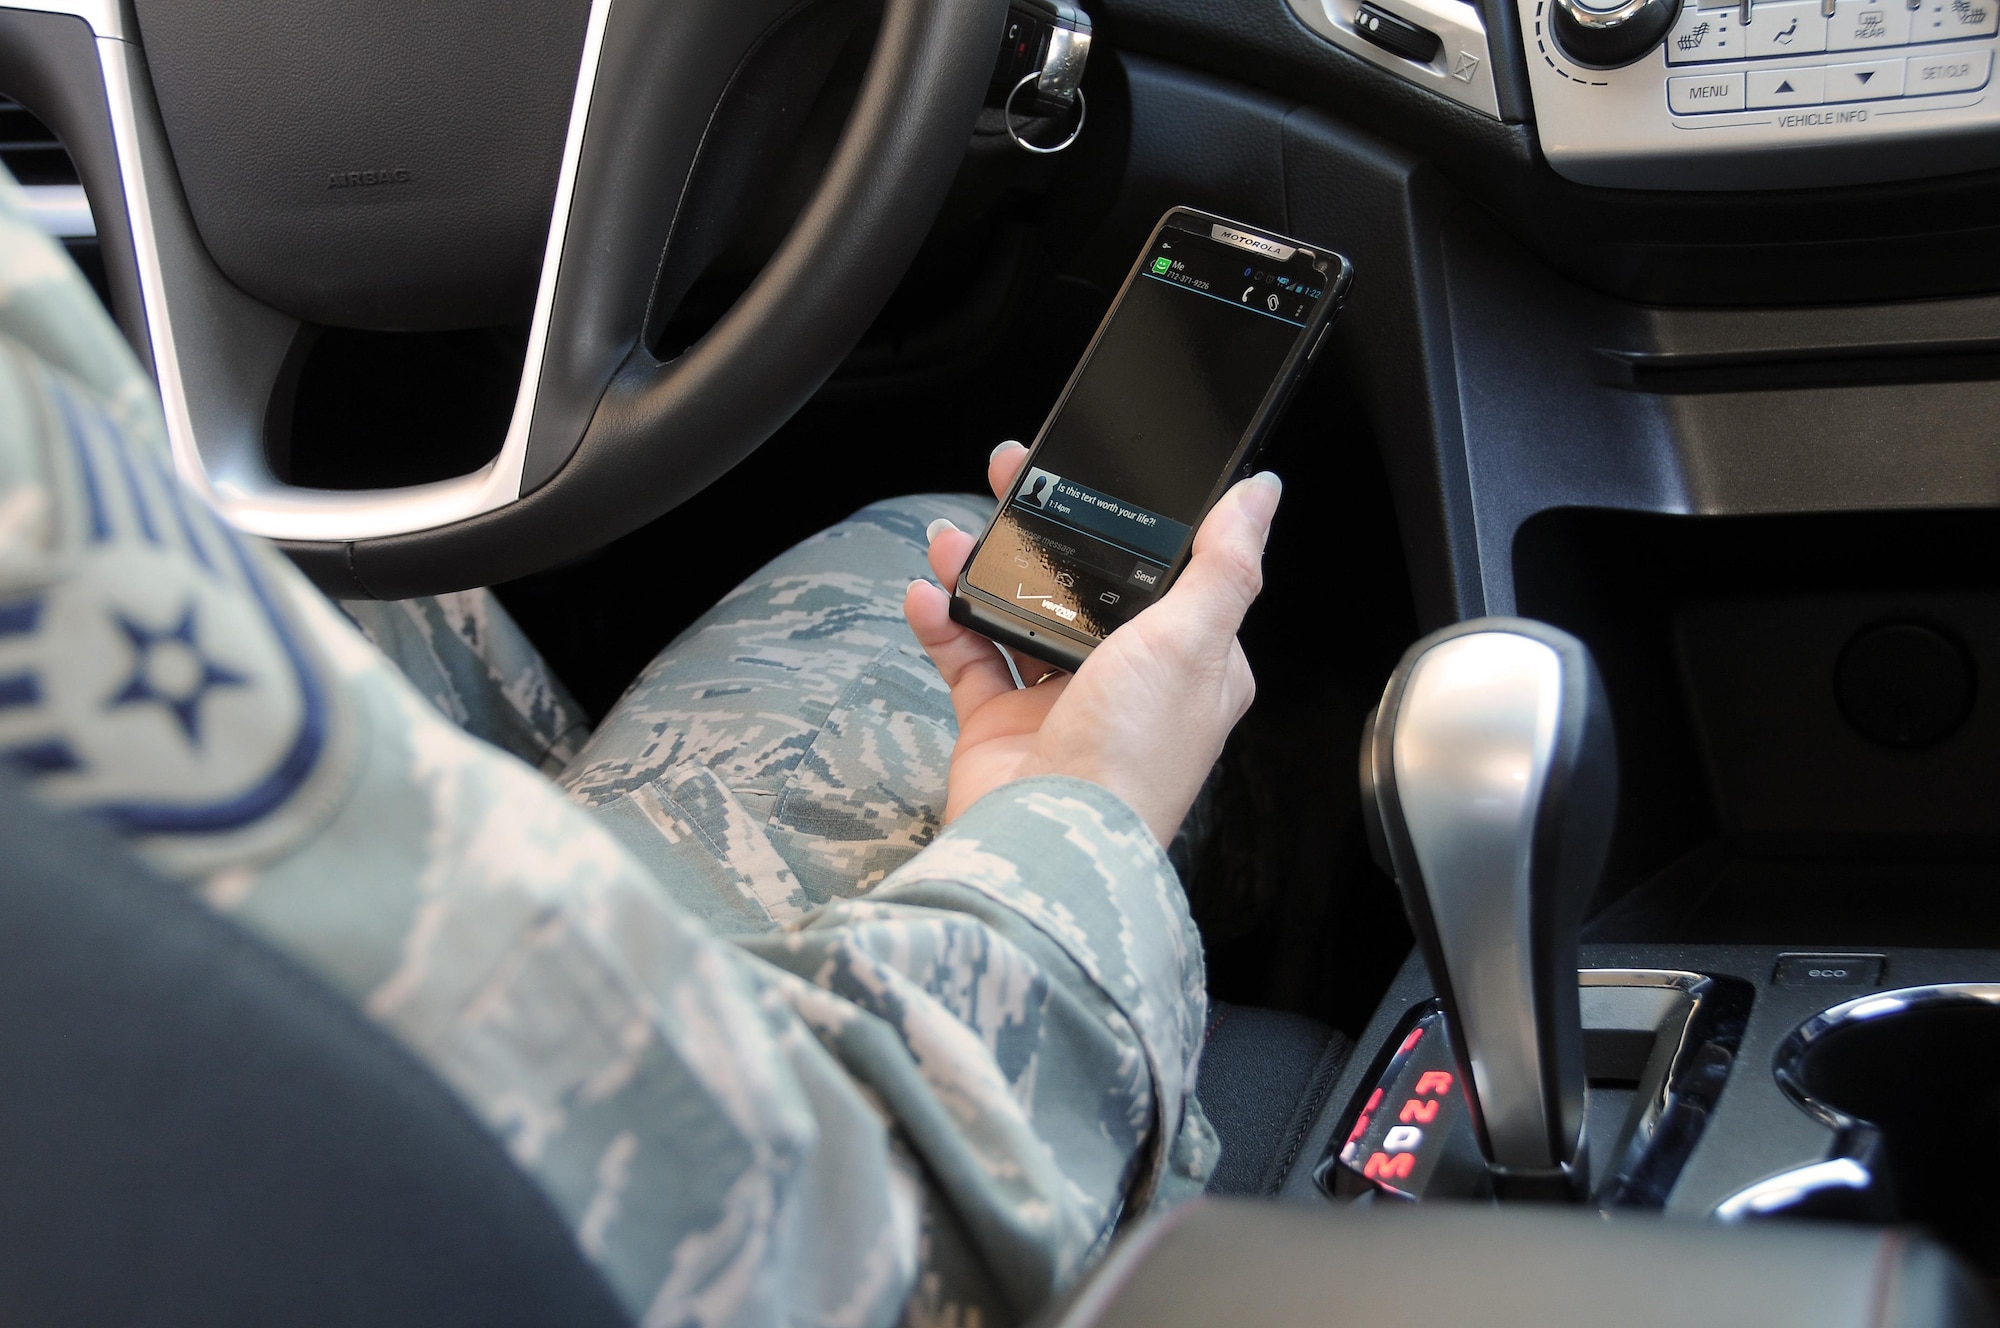 In 2013, police departments and insurance companies throughout the United States said the top cause of automobile accidents is distracted driving. While distracted driving laws vary from state to state, using personal electronic devices on any military installation is strictly forbidden by most members of the military. The facts about distracted driving have also proven that driving while distracted is never a good idea. (Illustrative Photo).(U. S. Air National Guard Photo By: MSgt Vincent De Groot)